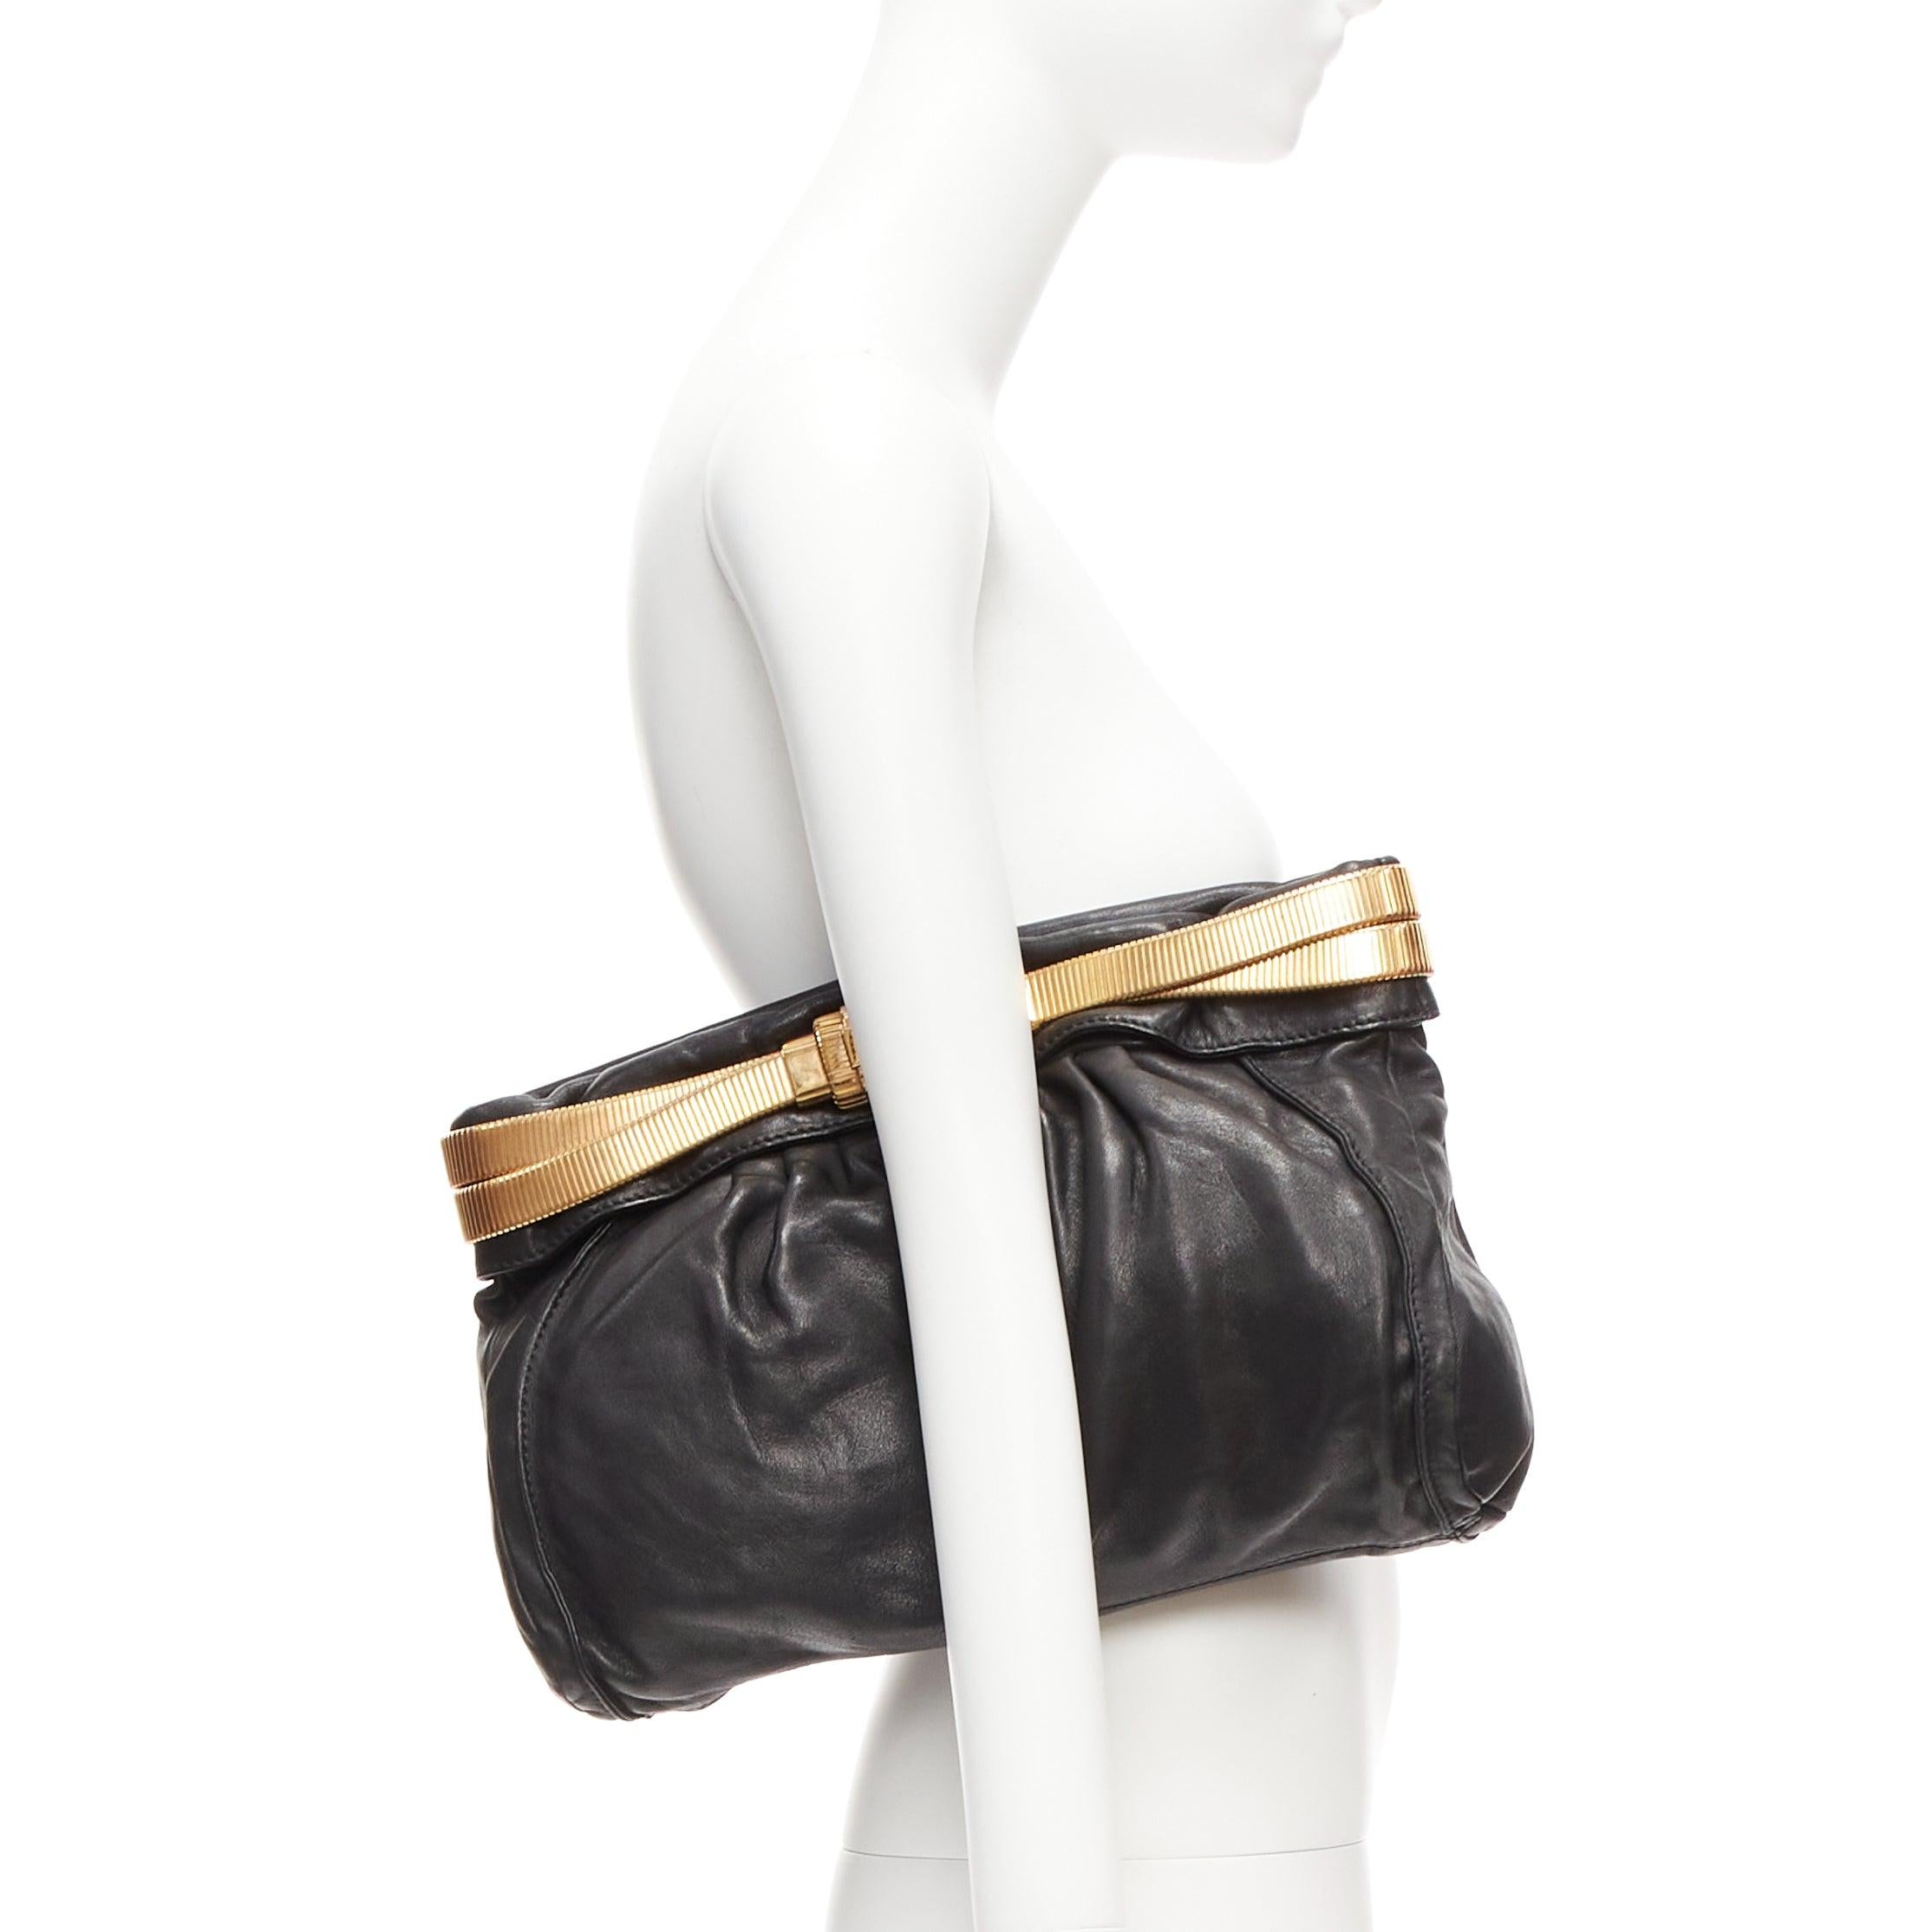 JIMMY CHOO black soft leather gold chain logo zip oversized clutch bag
Reference: CELG/A00407
Brand: Jimmy Choo
Material: Leather, Metal
Color: Black, Gold
Pattern: Solid
Closure: Zip
Lining: Beige Fabric
Extra Details: Crafted from pleated leather